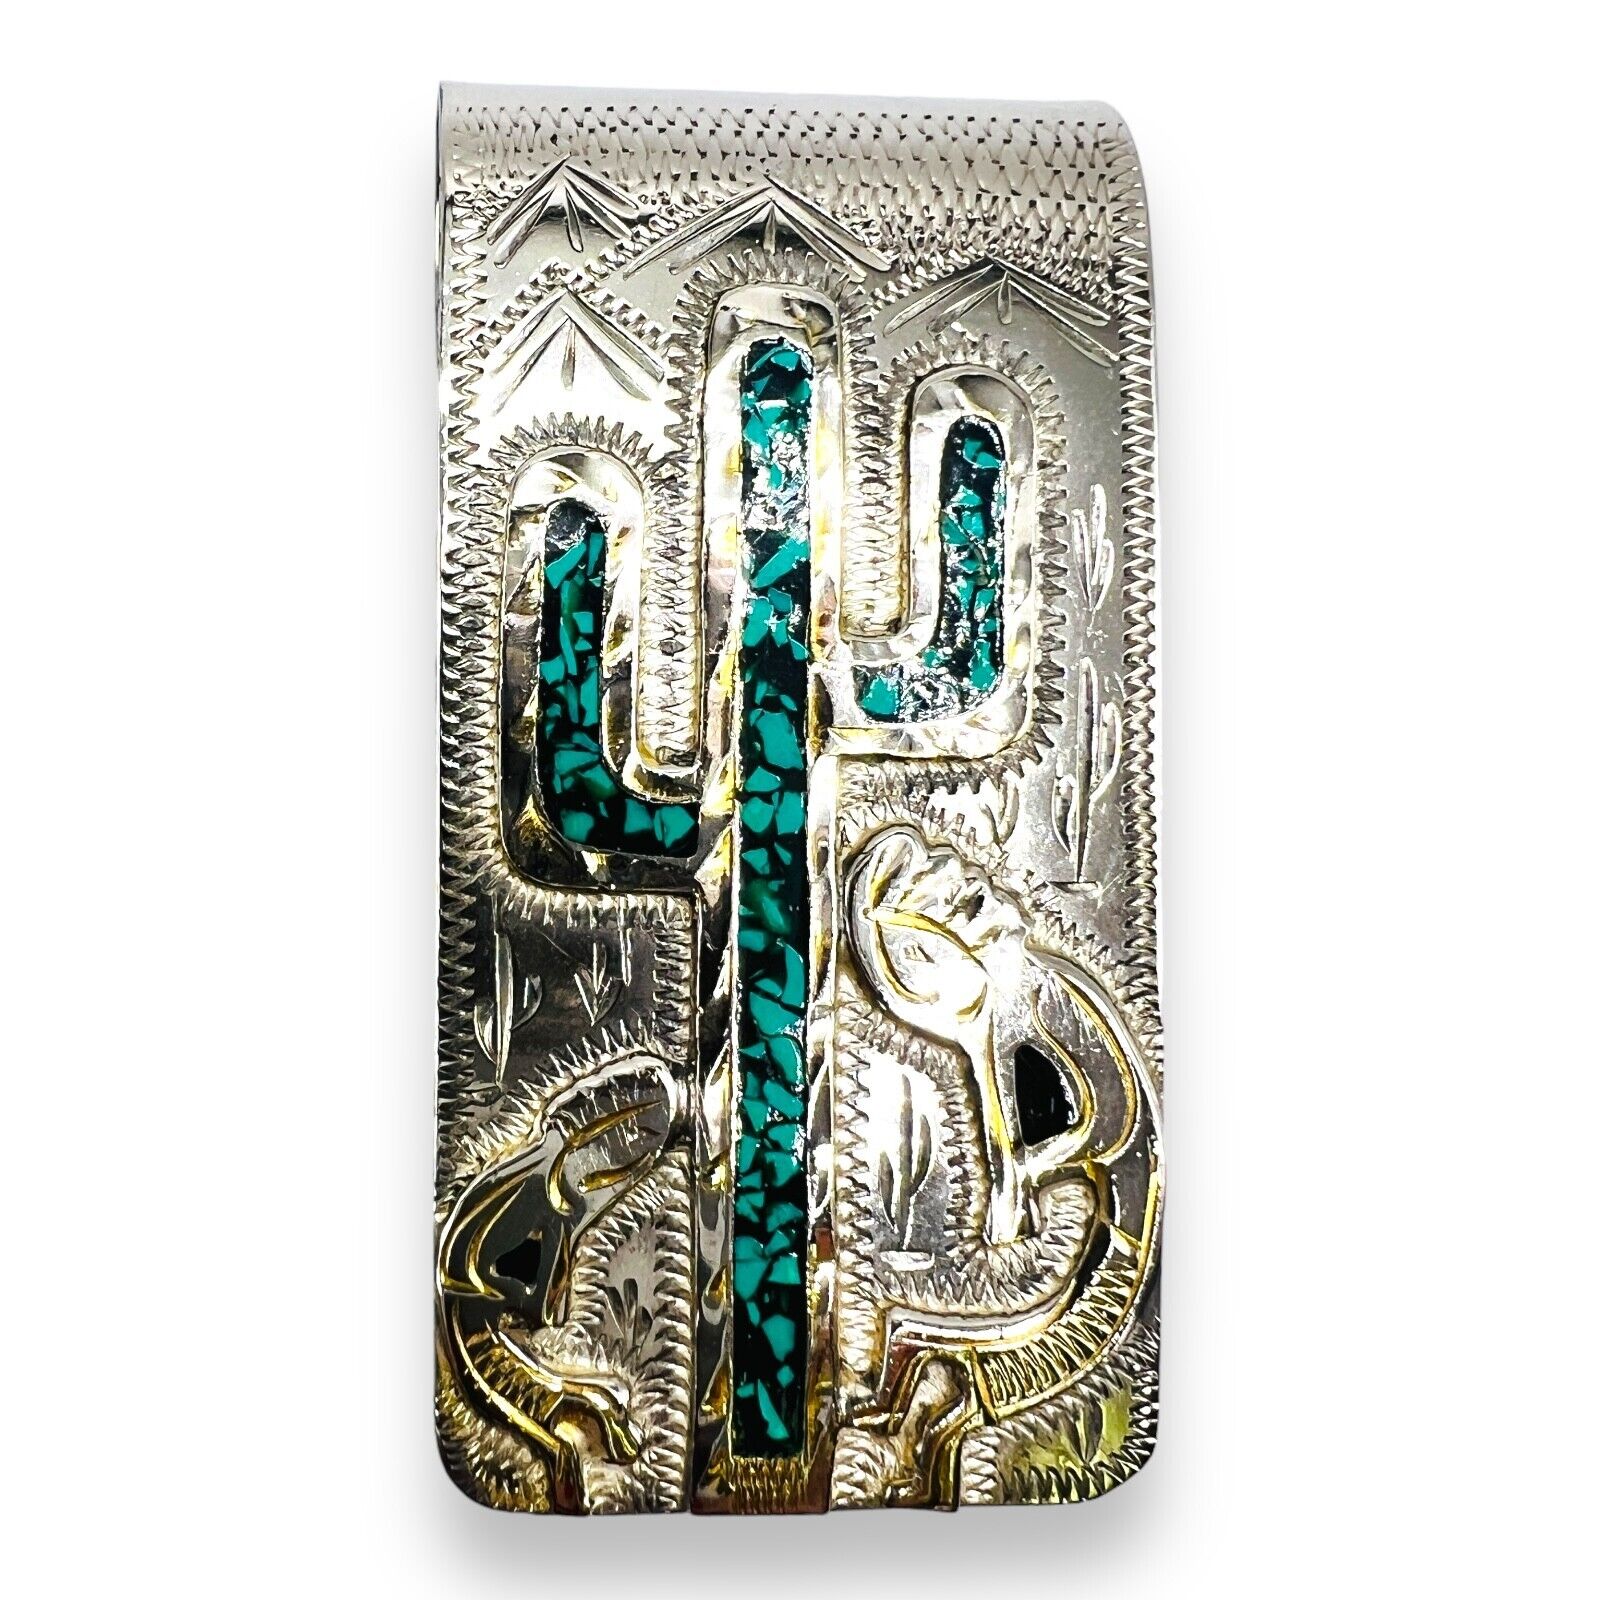 Kokopelli Turquoise Inlay Cactus Engraved Money Clip 925 Sterling Silver -000385